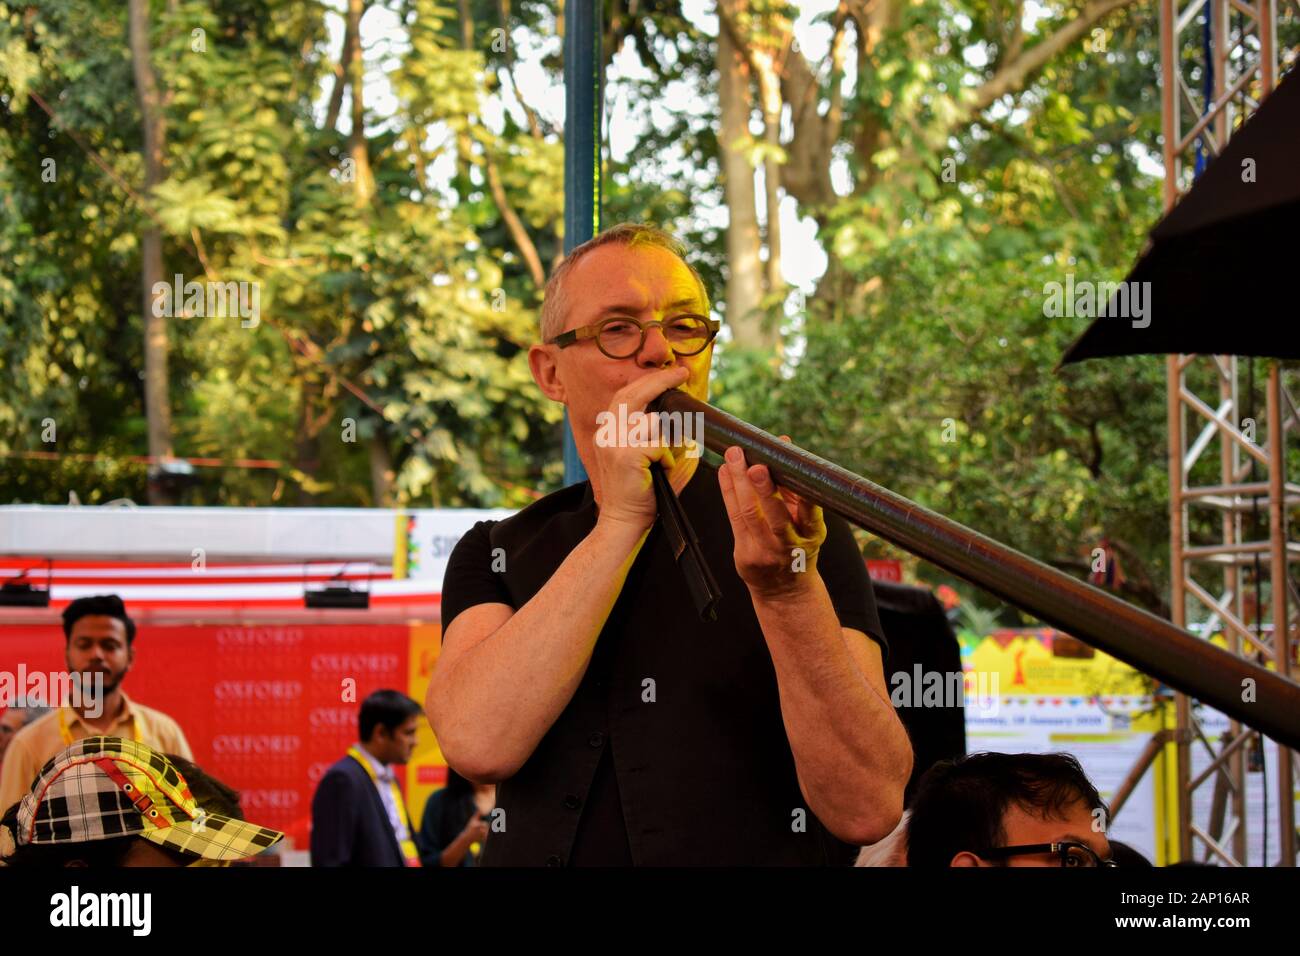 Kolkata, India. 18th Jan, 2020. Literary festival organised by Apeejay group in the heart of Kolkata. International personalities group sessions and their life experiences were shared. (Photo by Rahul Biswas/Pacific Press) Credit: Pacific Press Agency/Alamy Live News Stock Photo